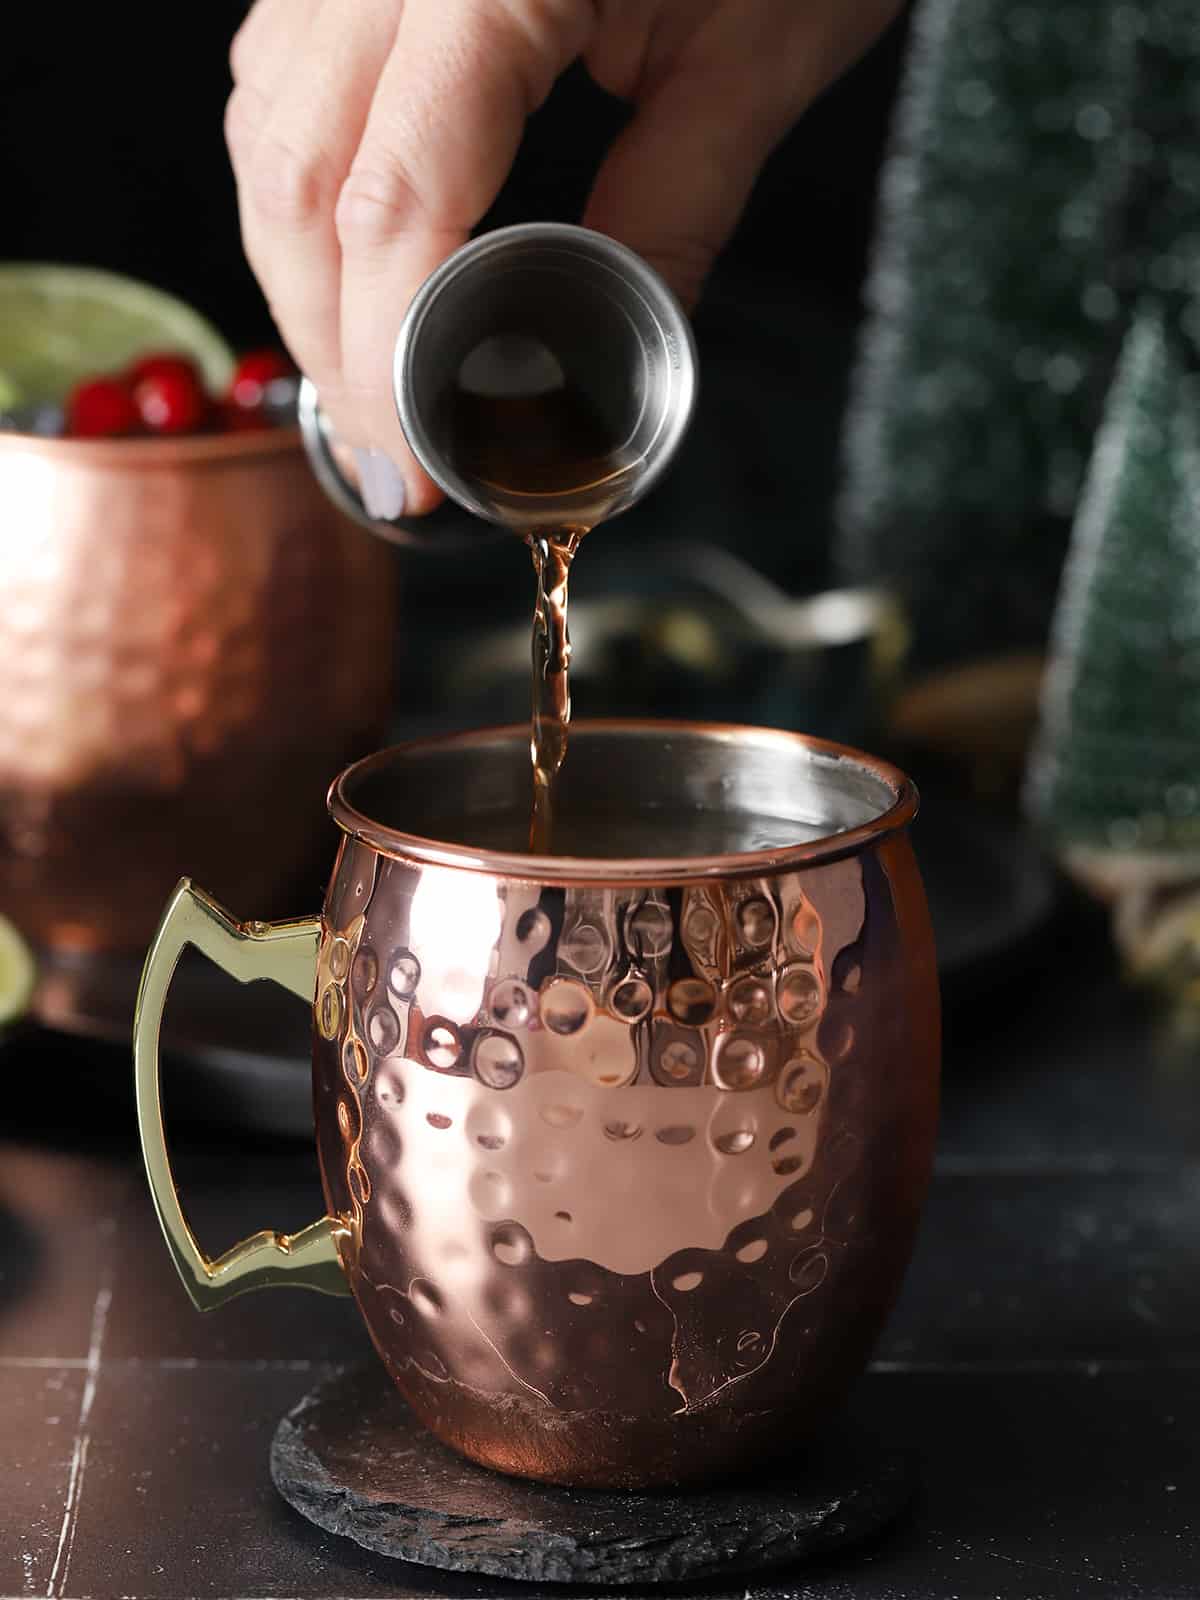 Cranberry juice being poured into a copper mug.